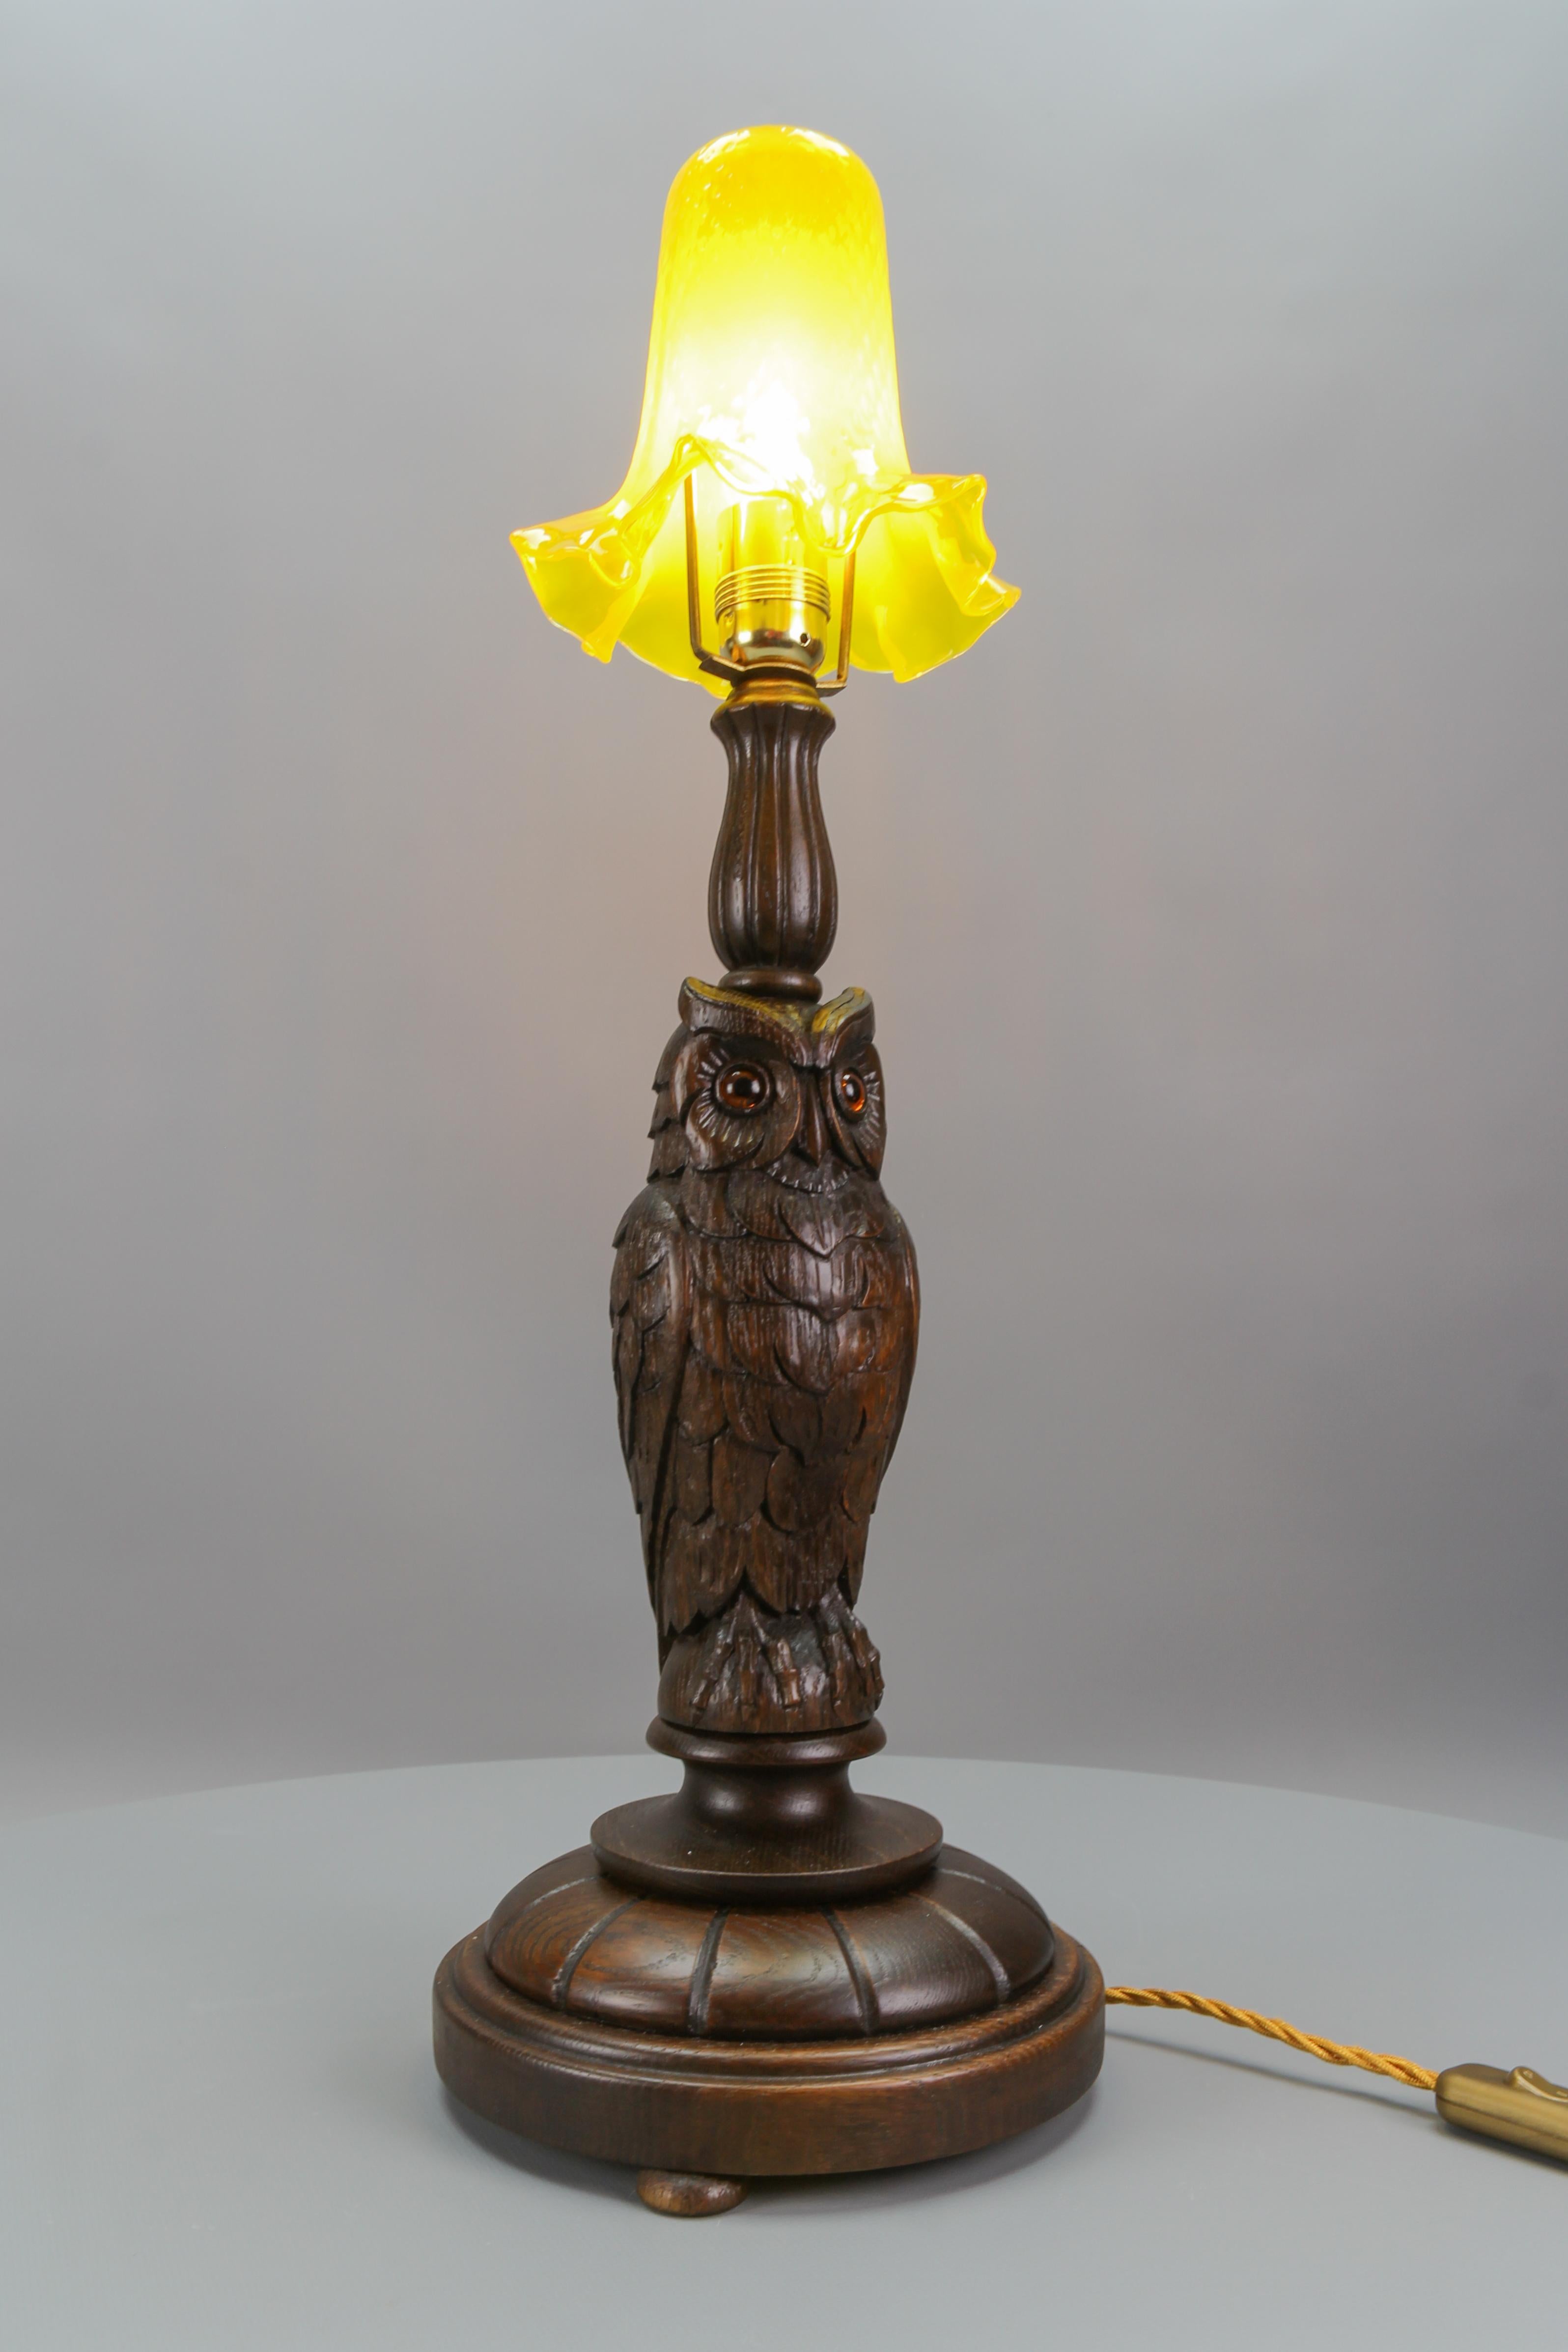 Hand-Carved Art Deco Table Lamp with Owl Sculpture and Yellow Glass Lampshade, ca. 1920 For Sale